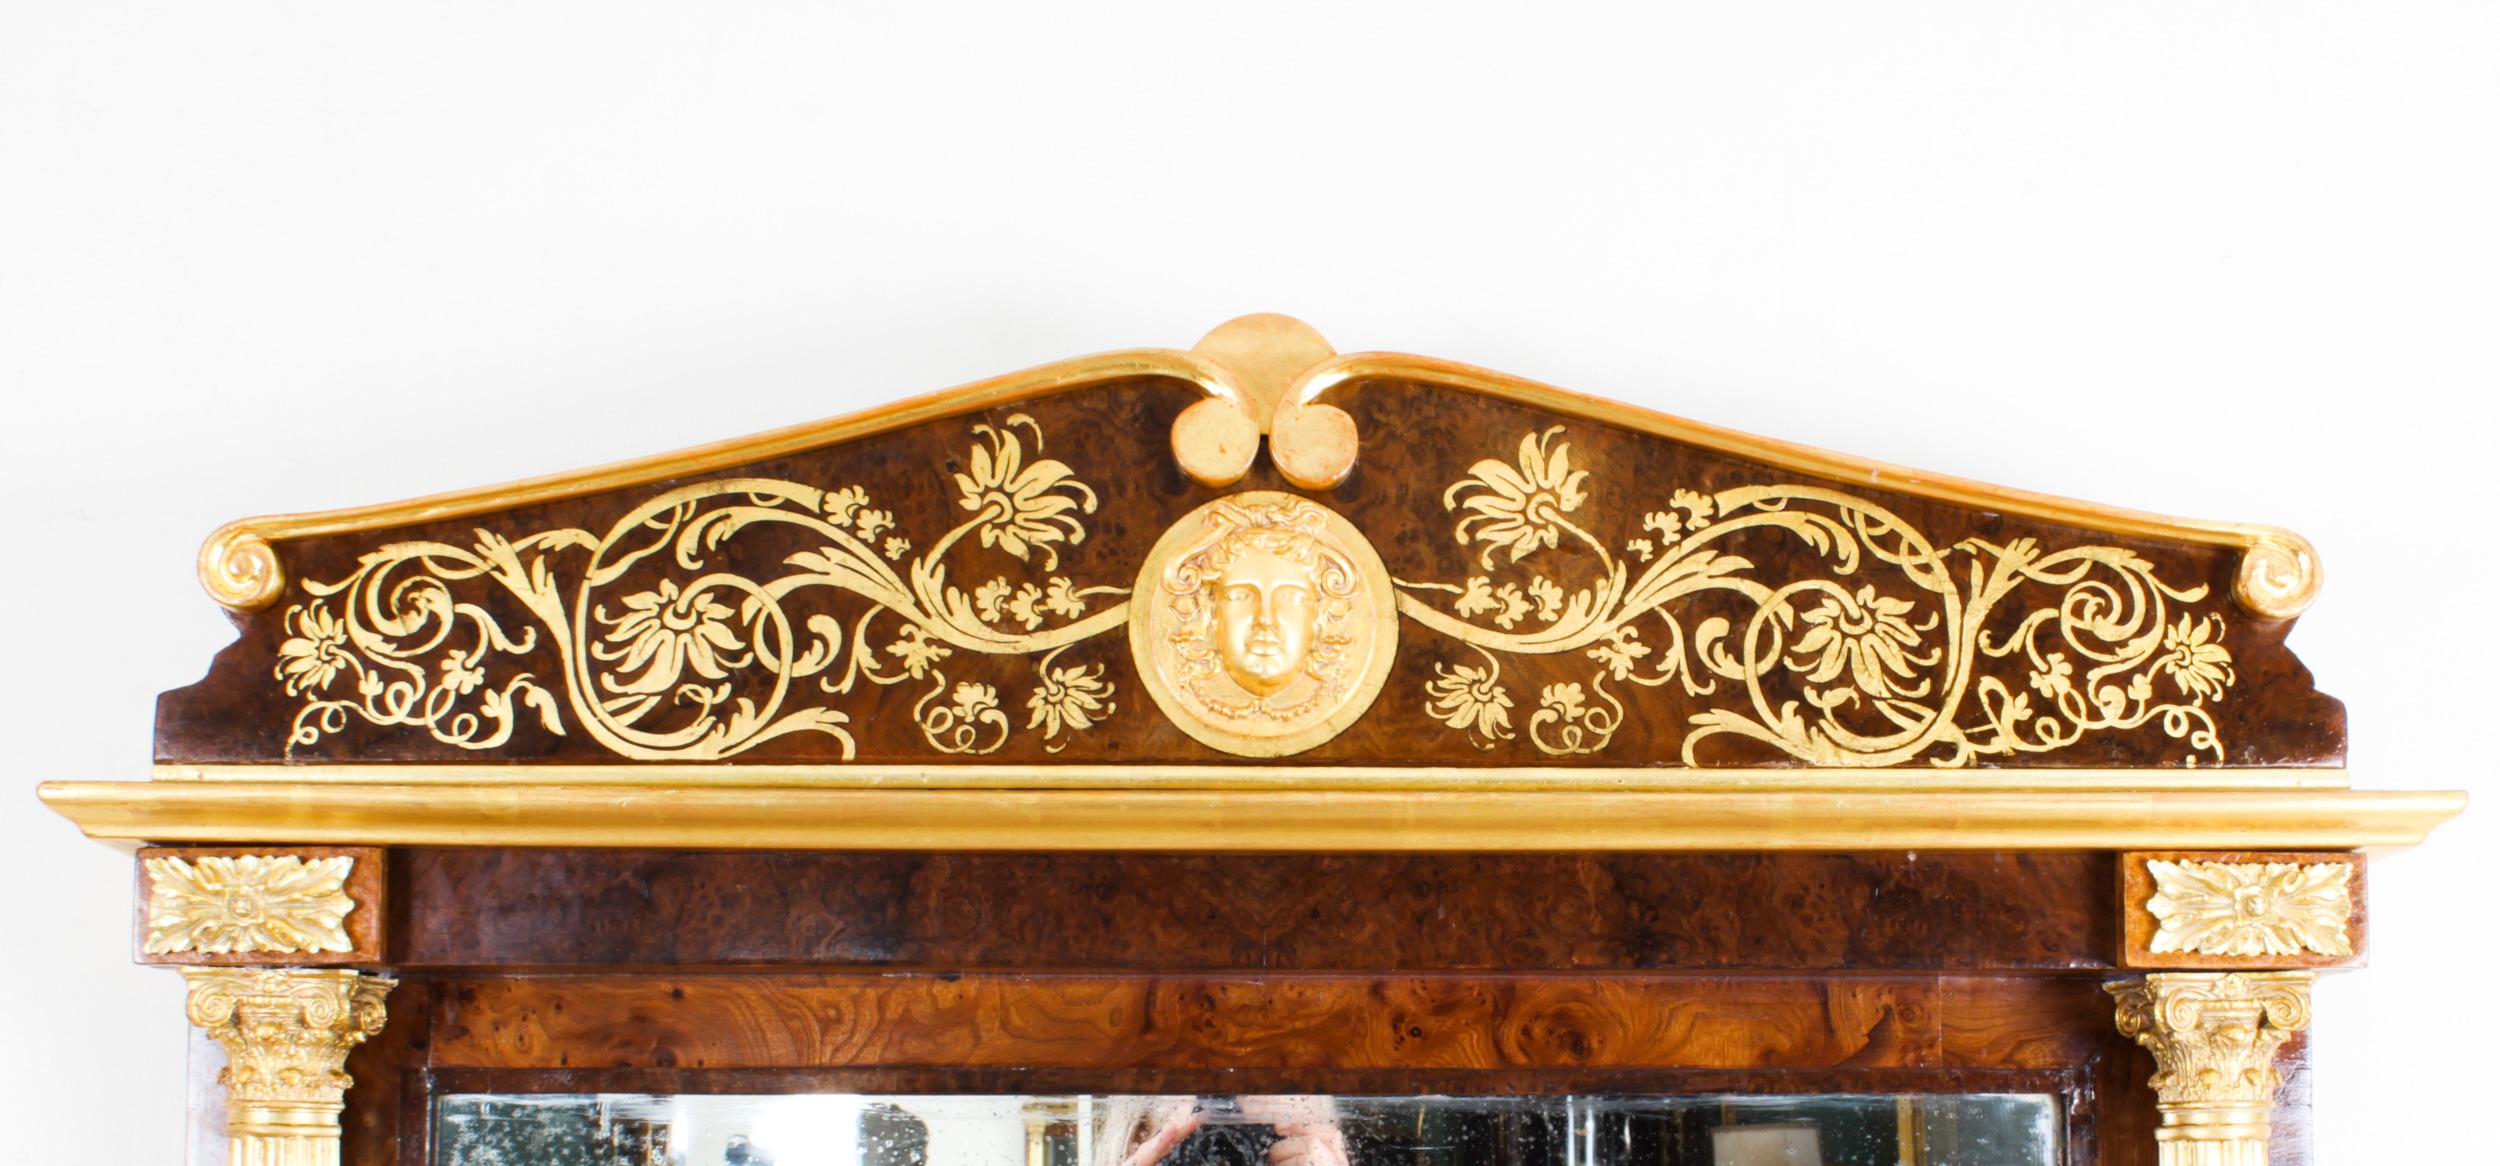 A beautiful antique French burr walnut and parcel gilt mirror, circa 1880 in date.
 
The rectangular mirror features a shaped crest with anthemion, a central gilt masque and further gilt foliate and floral ornamentation.
 
It has its original